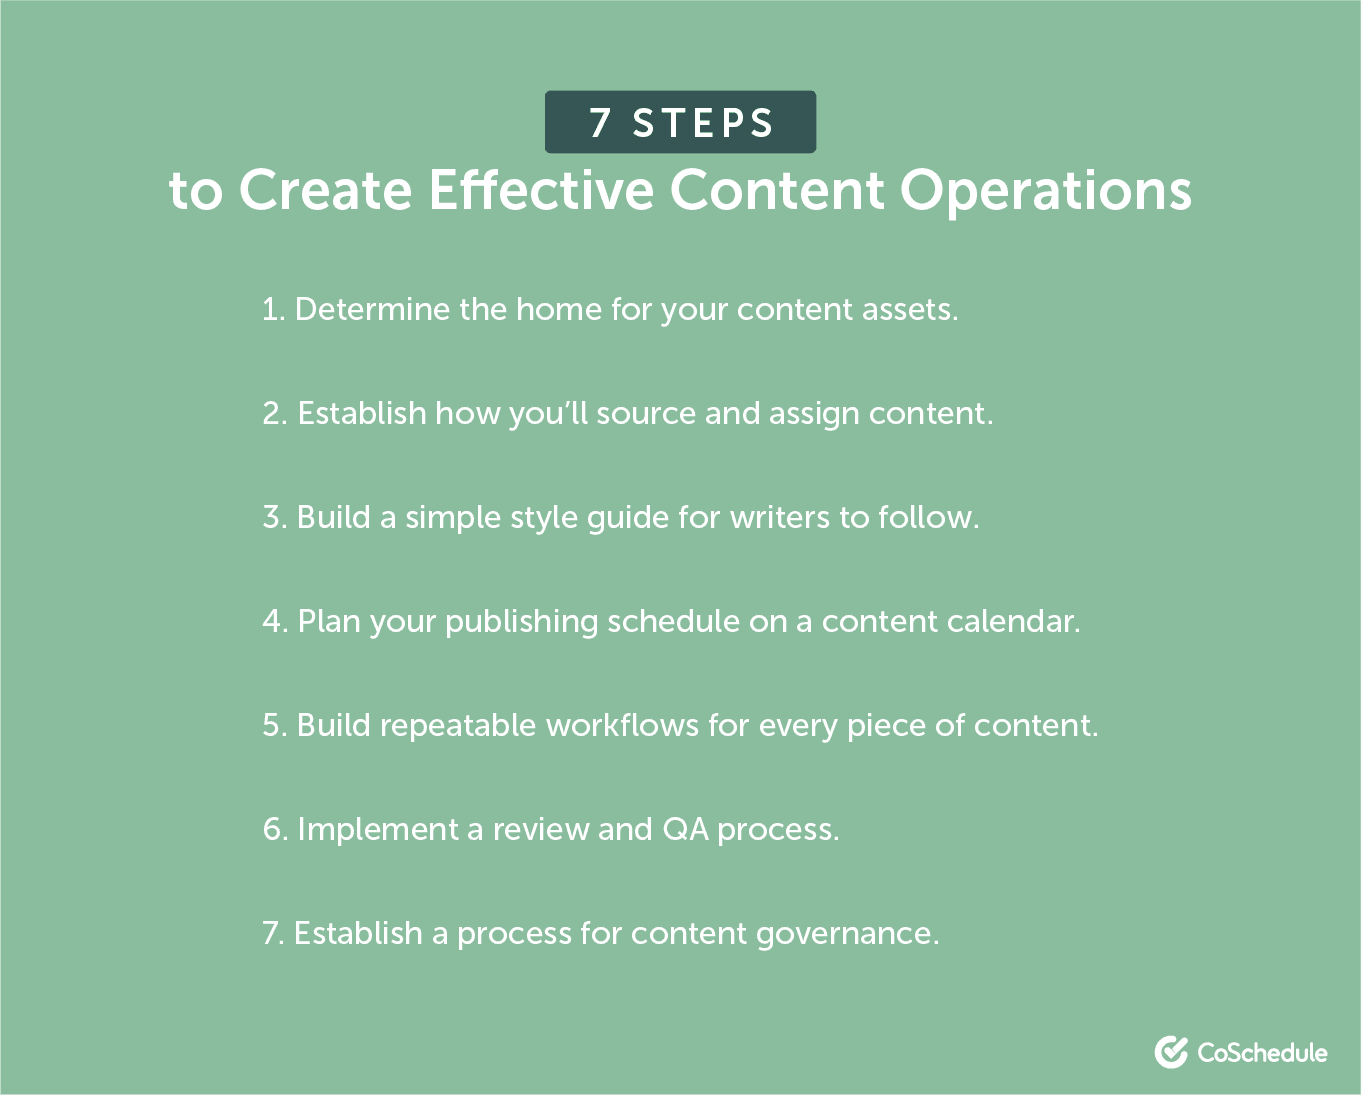 7 steps to create effective content operations